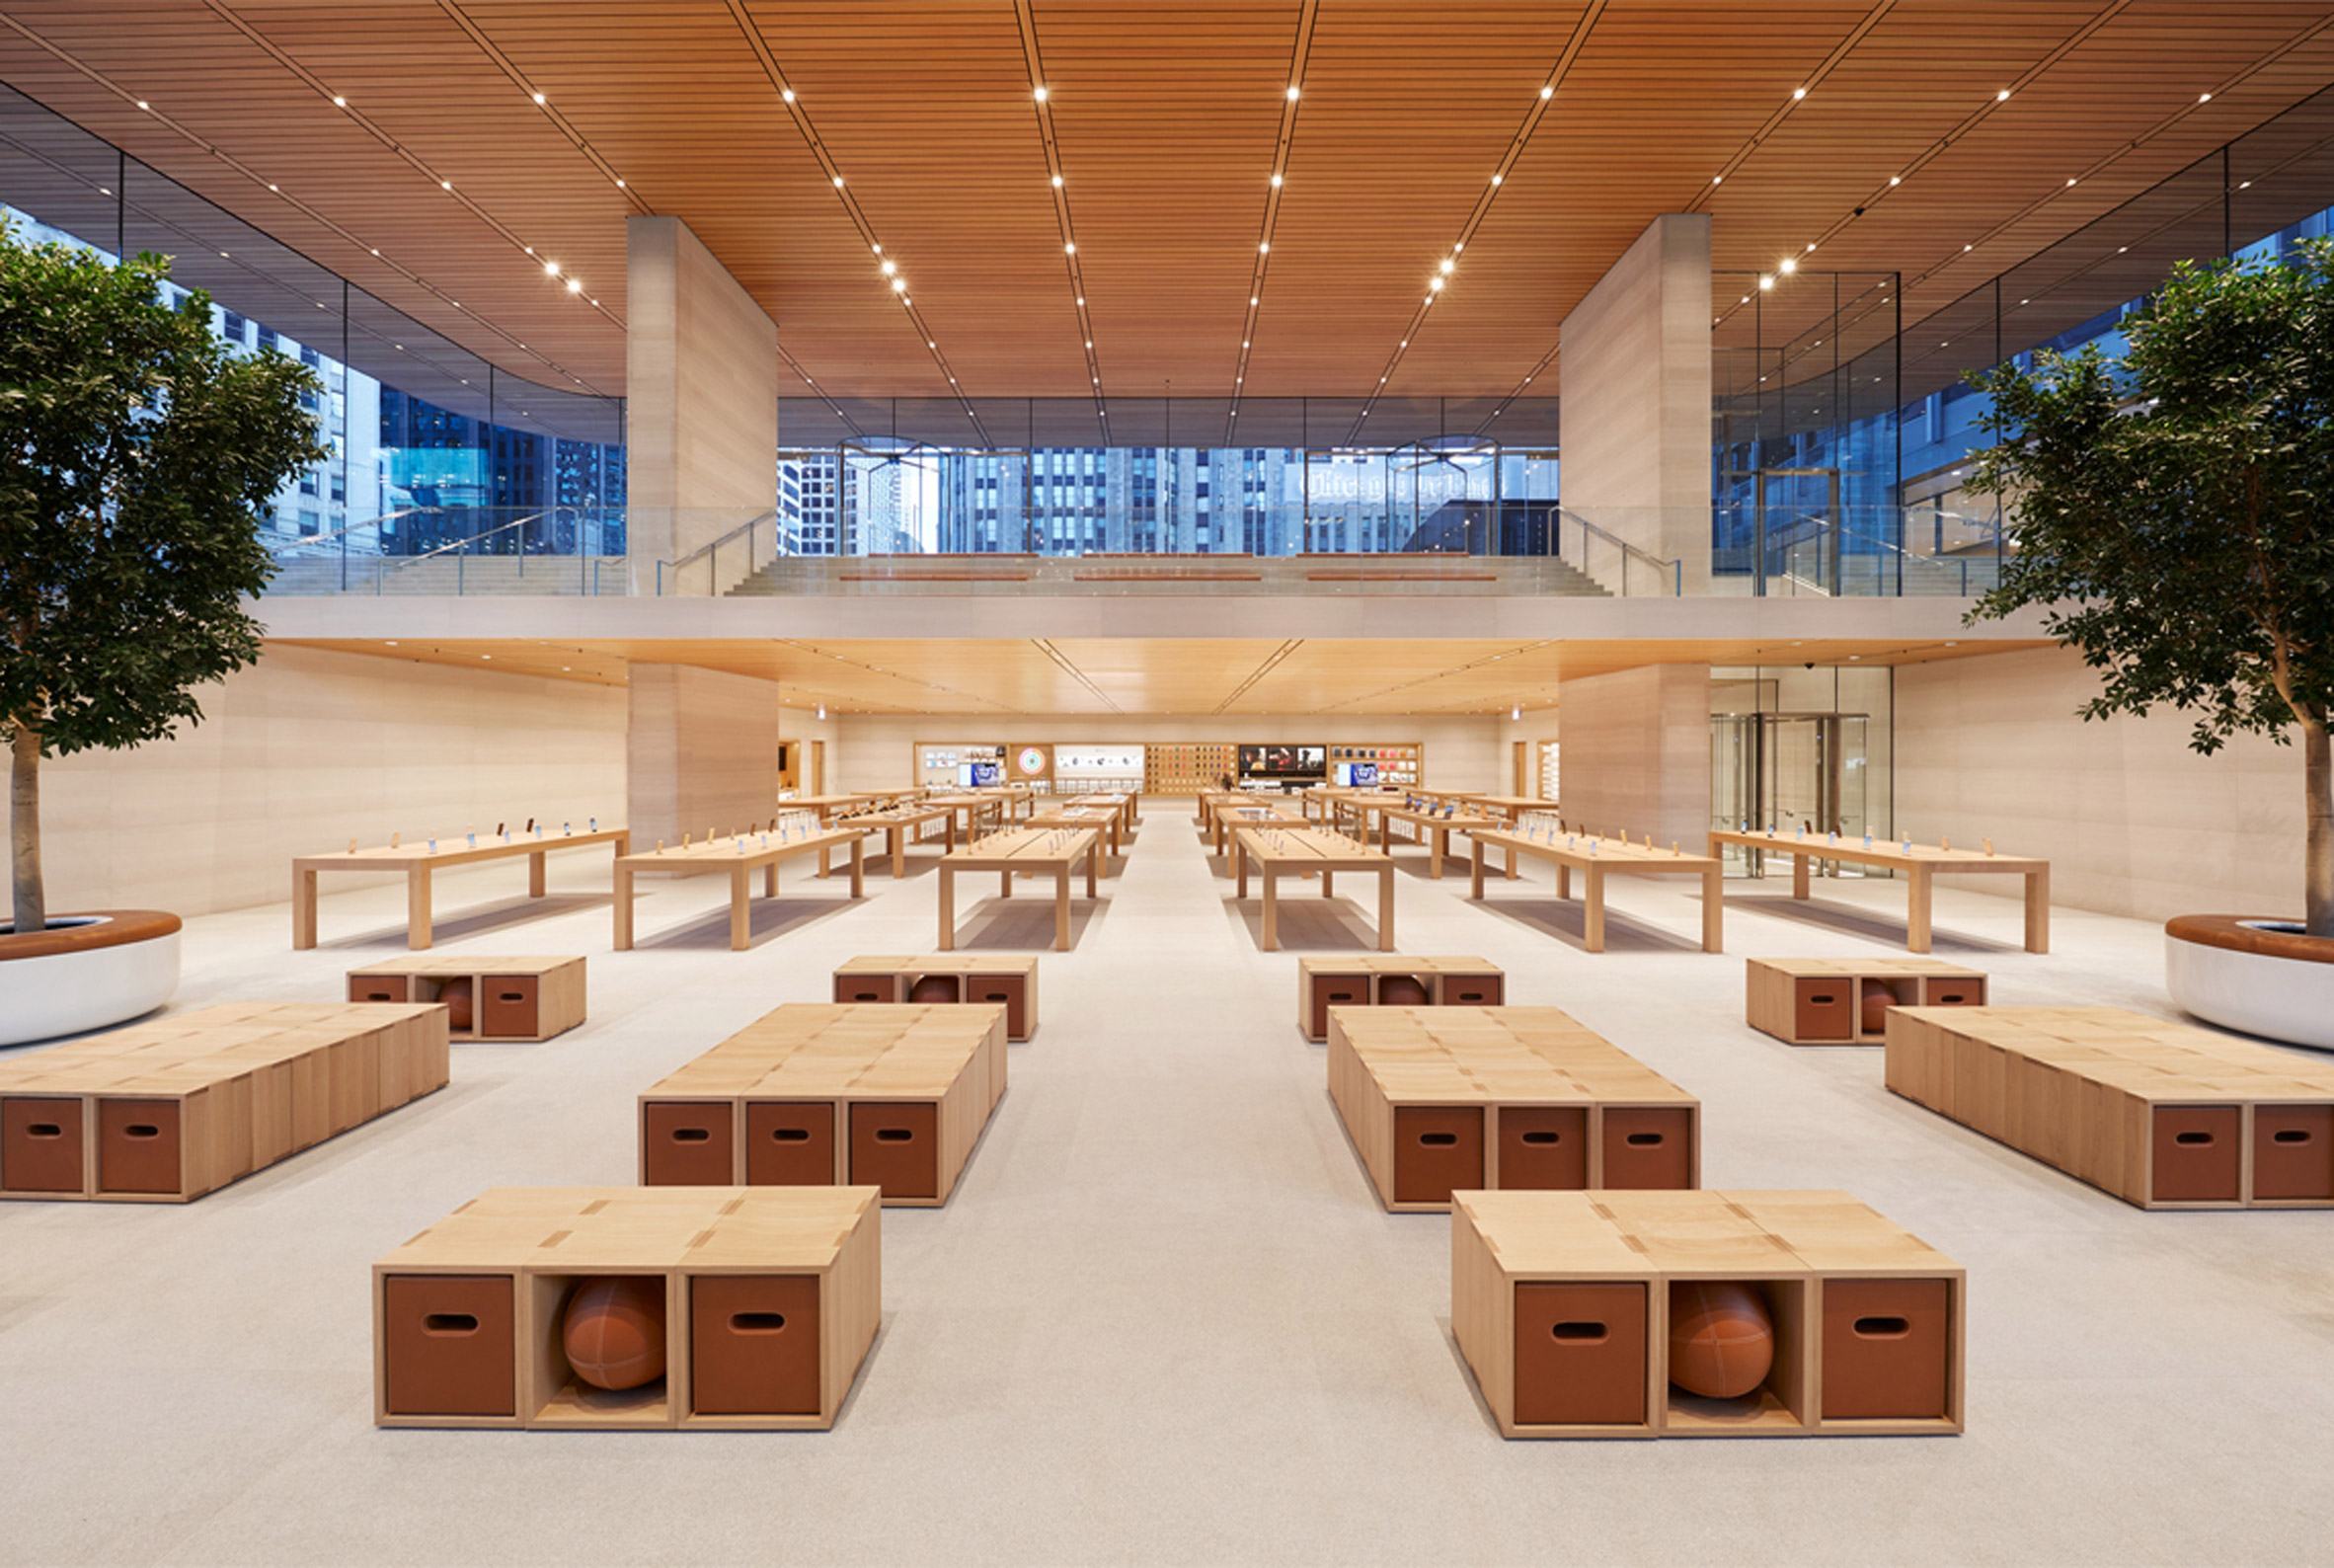 Apple retail store in Chicago full of glass and places to mingle